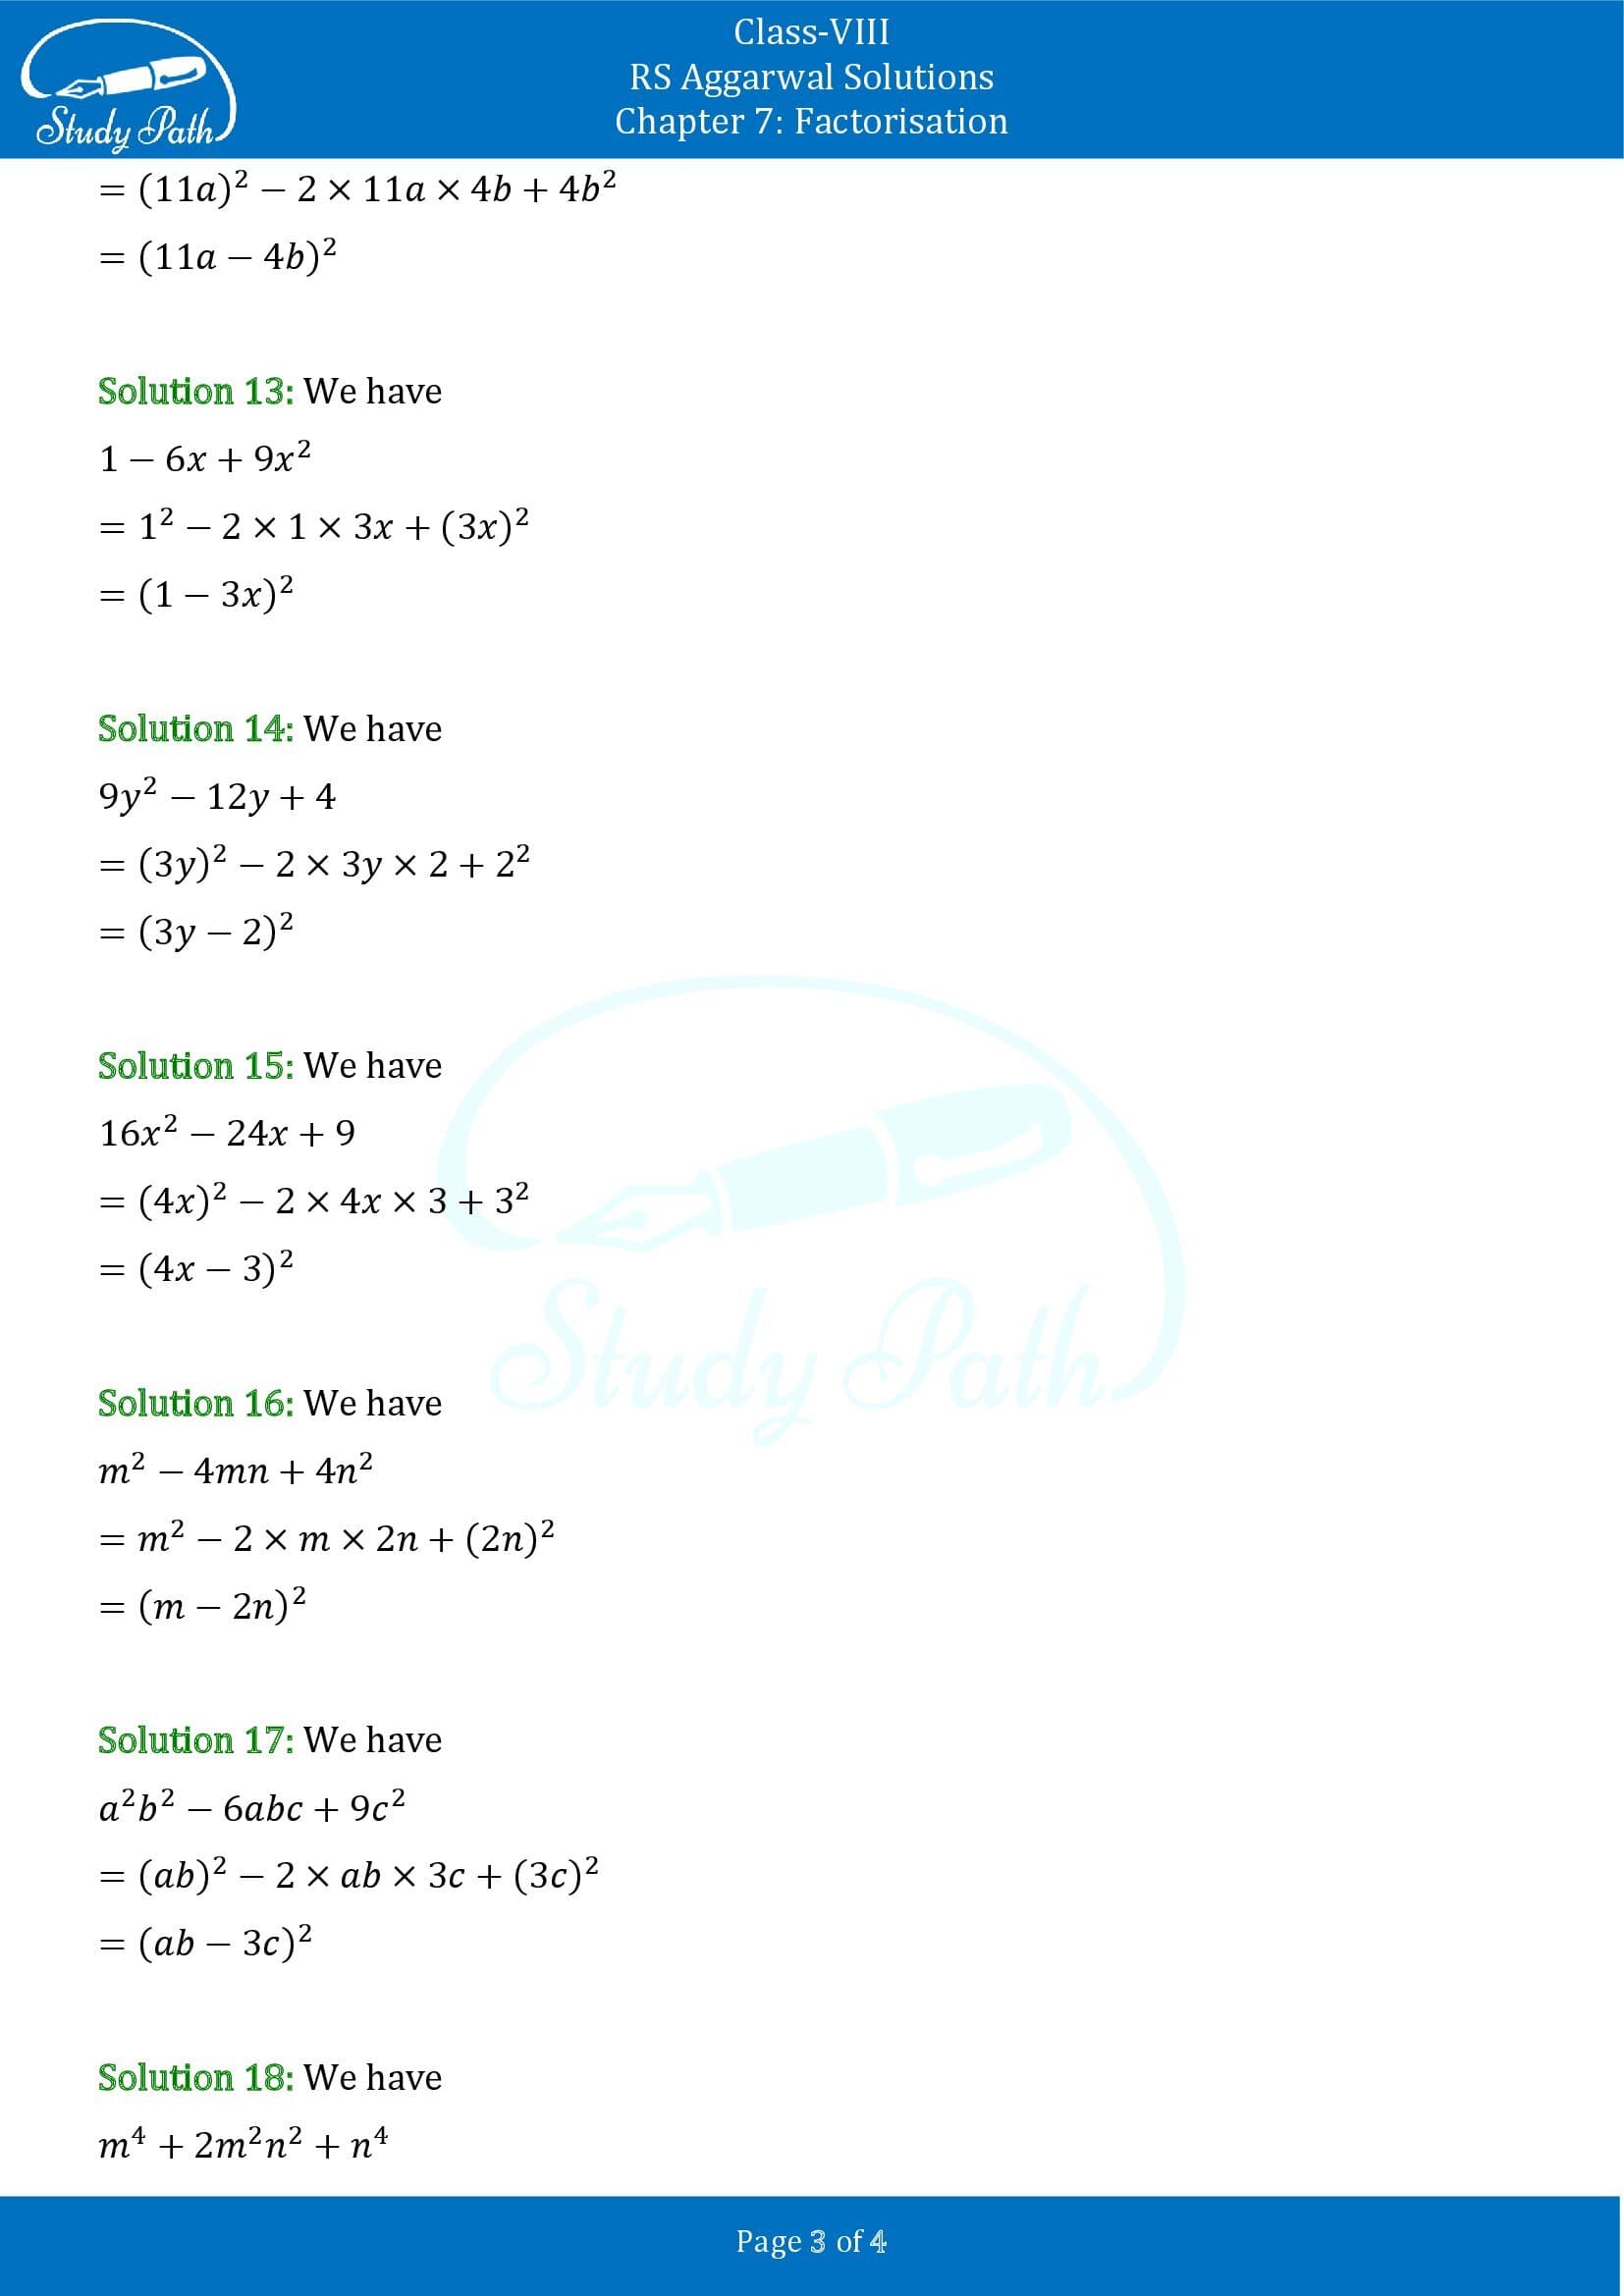 RS Aggarwal Solutions Class 8 Chapter 7 Factorisation Exercise 7C 00003